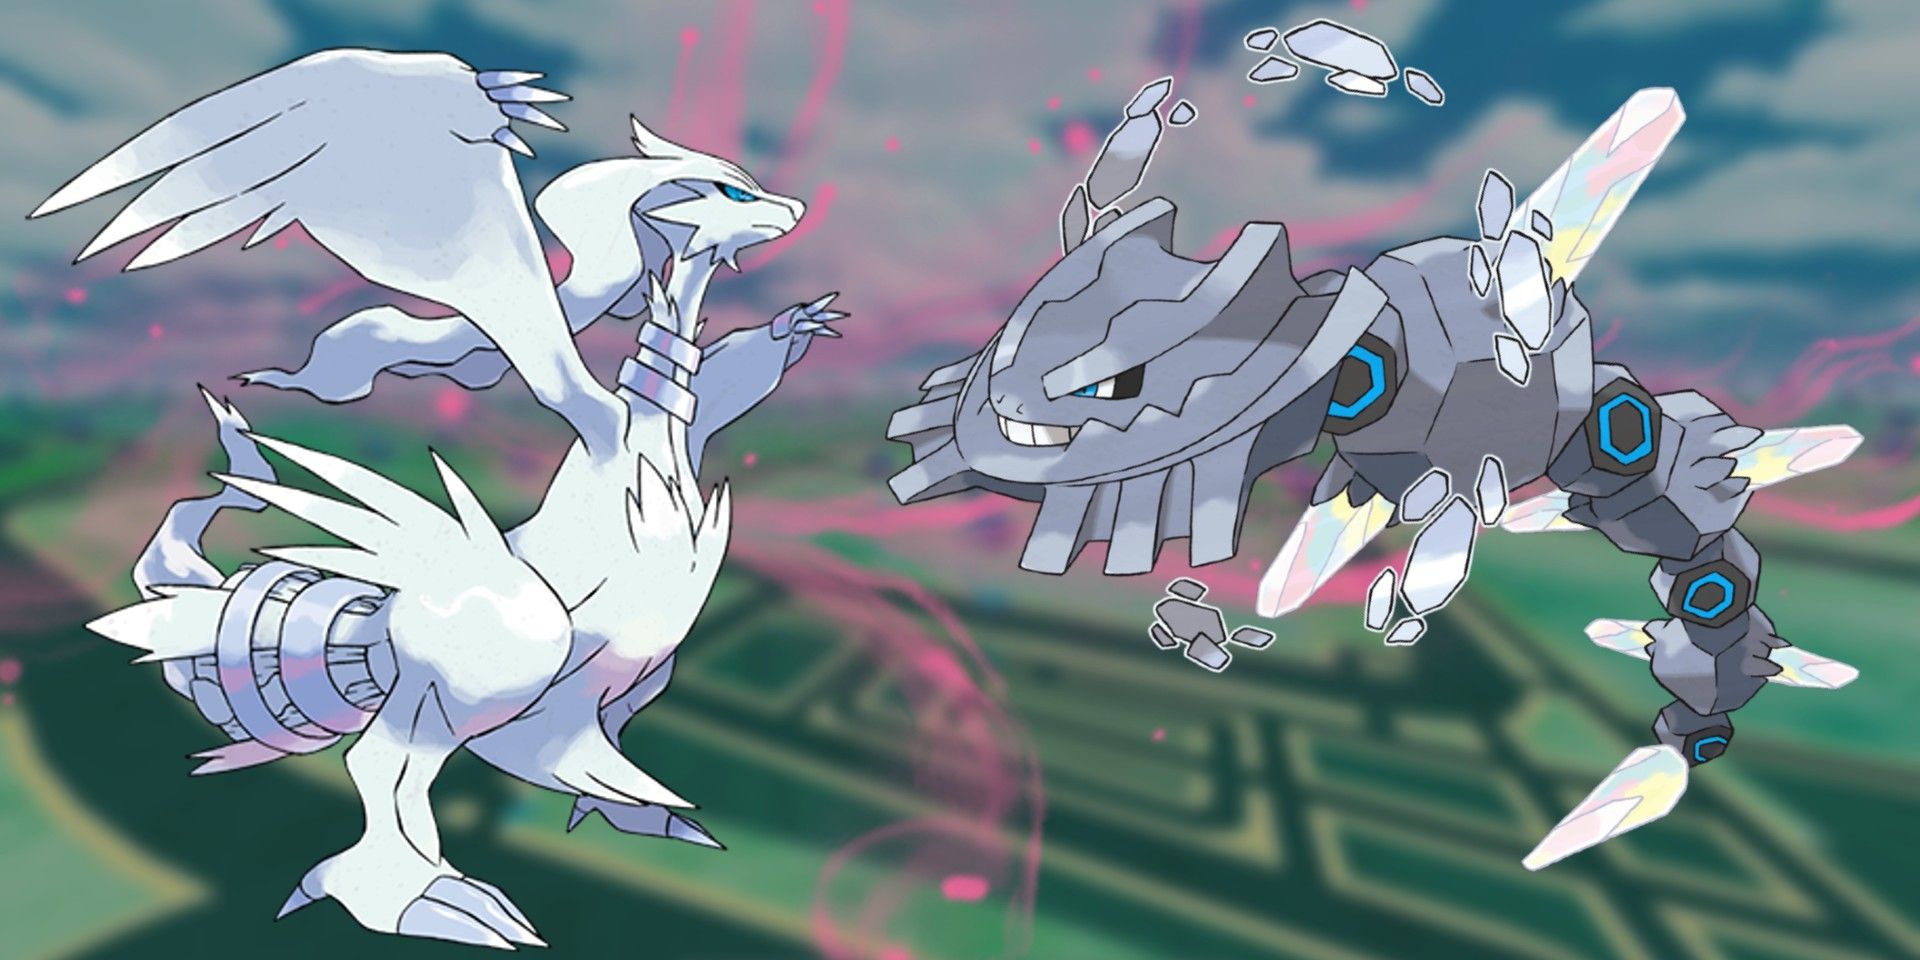 Pokemon's Reshiram is on the left and Mega Steelix is on the right. Behind them is a pink mist effect with Pokémon GO's layout in the background.